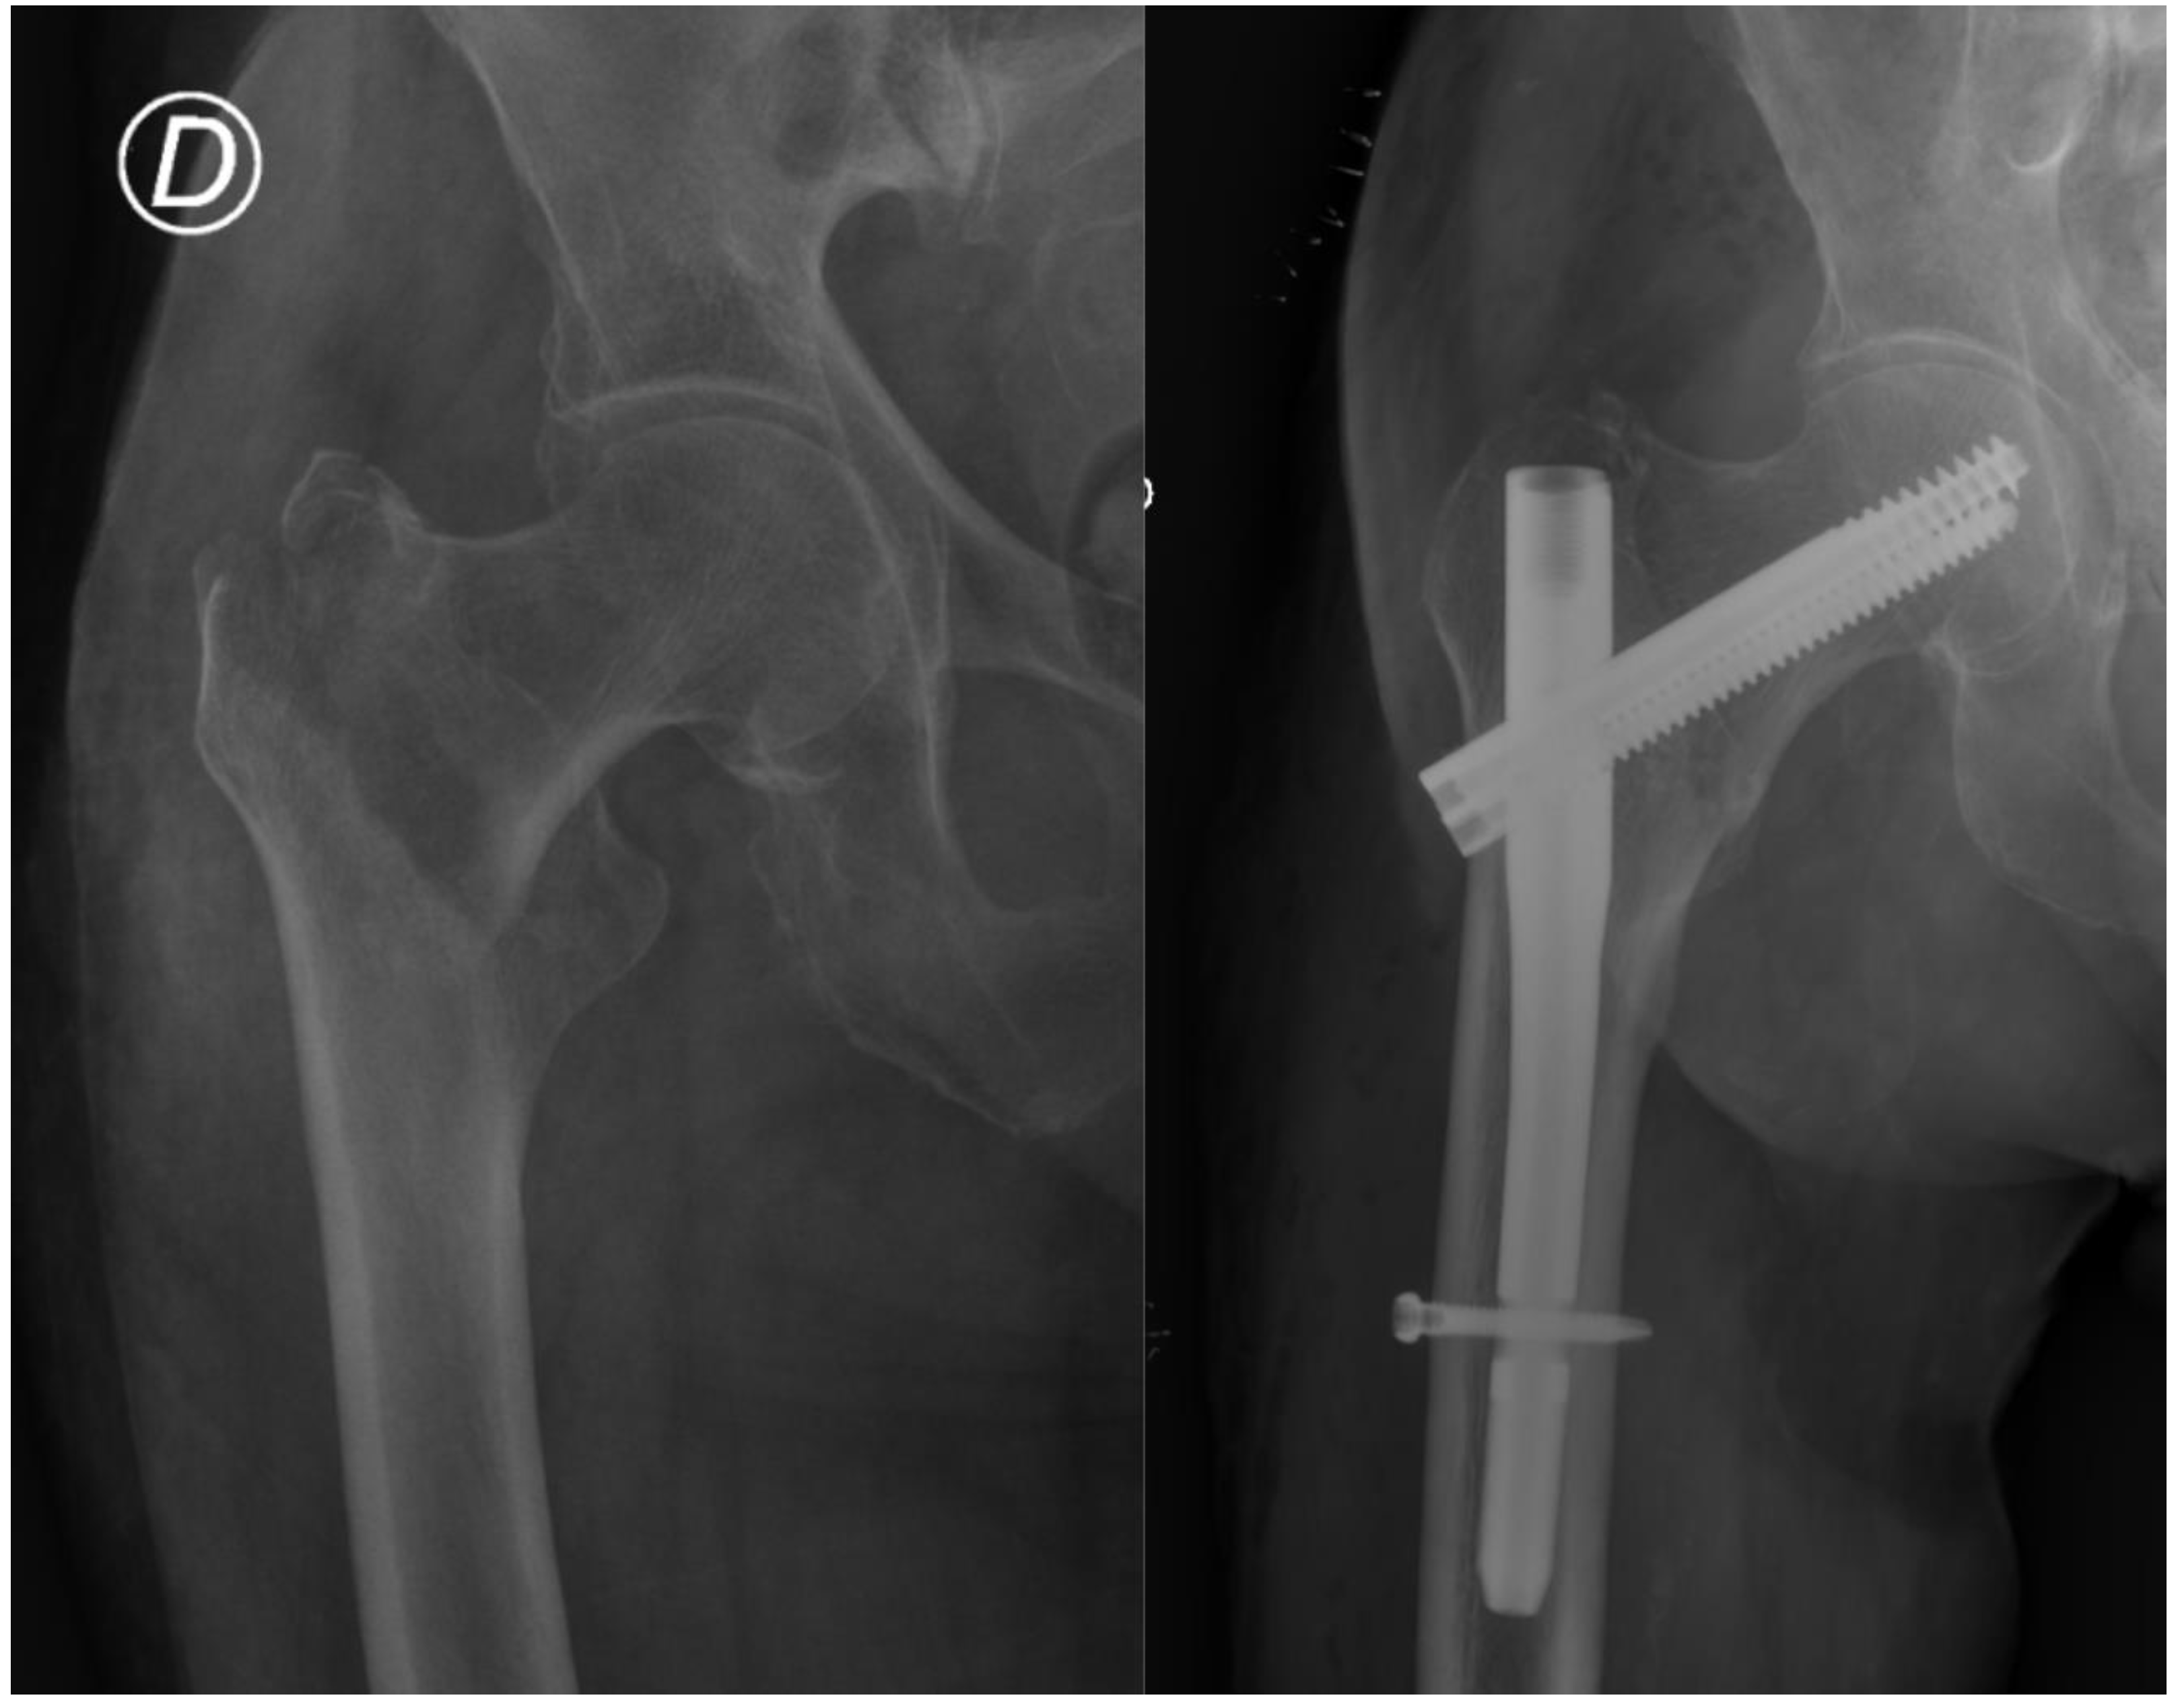 Cureus | Parameters Governing the Fate of Fracture Fixation With Proximal  Femoral Nailing (PFN) for Intertrochanteric Femur Fractures | Article